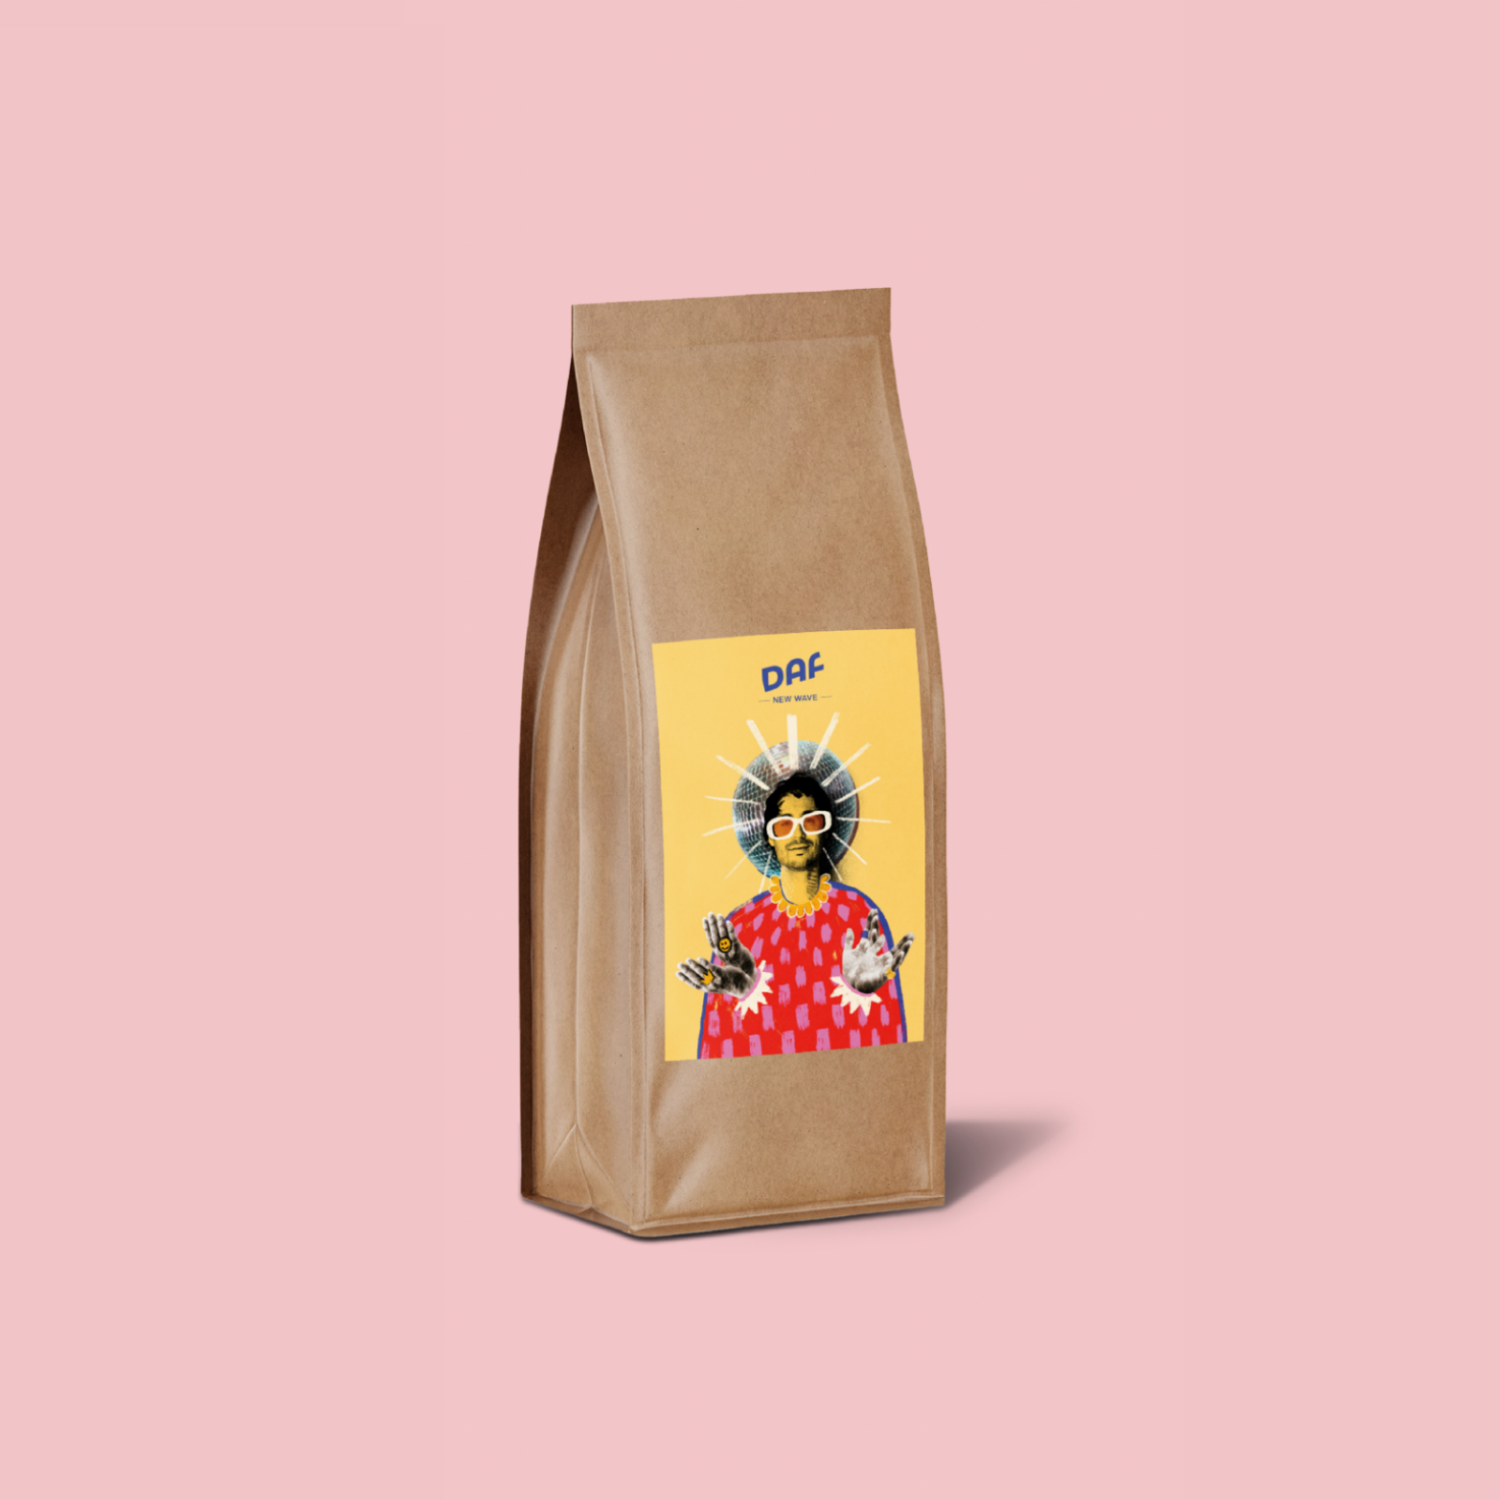 NEW WAVE beans - Sumatra INDONESIA - DAF - Our local brand